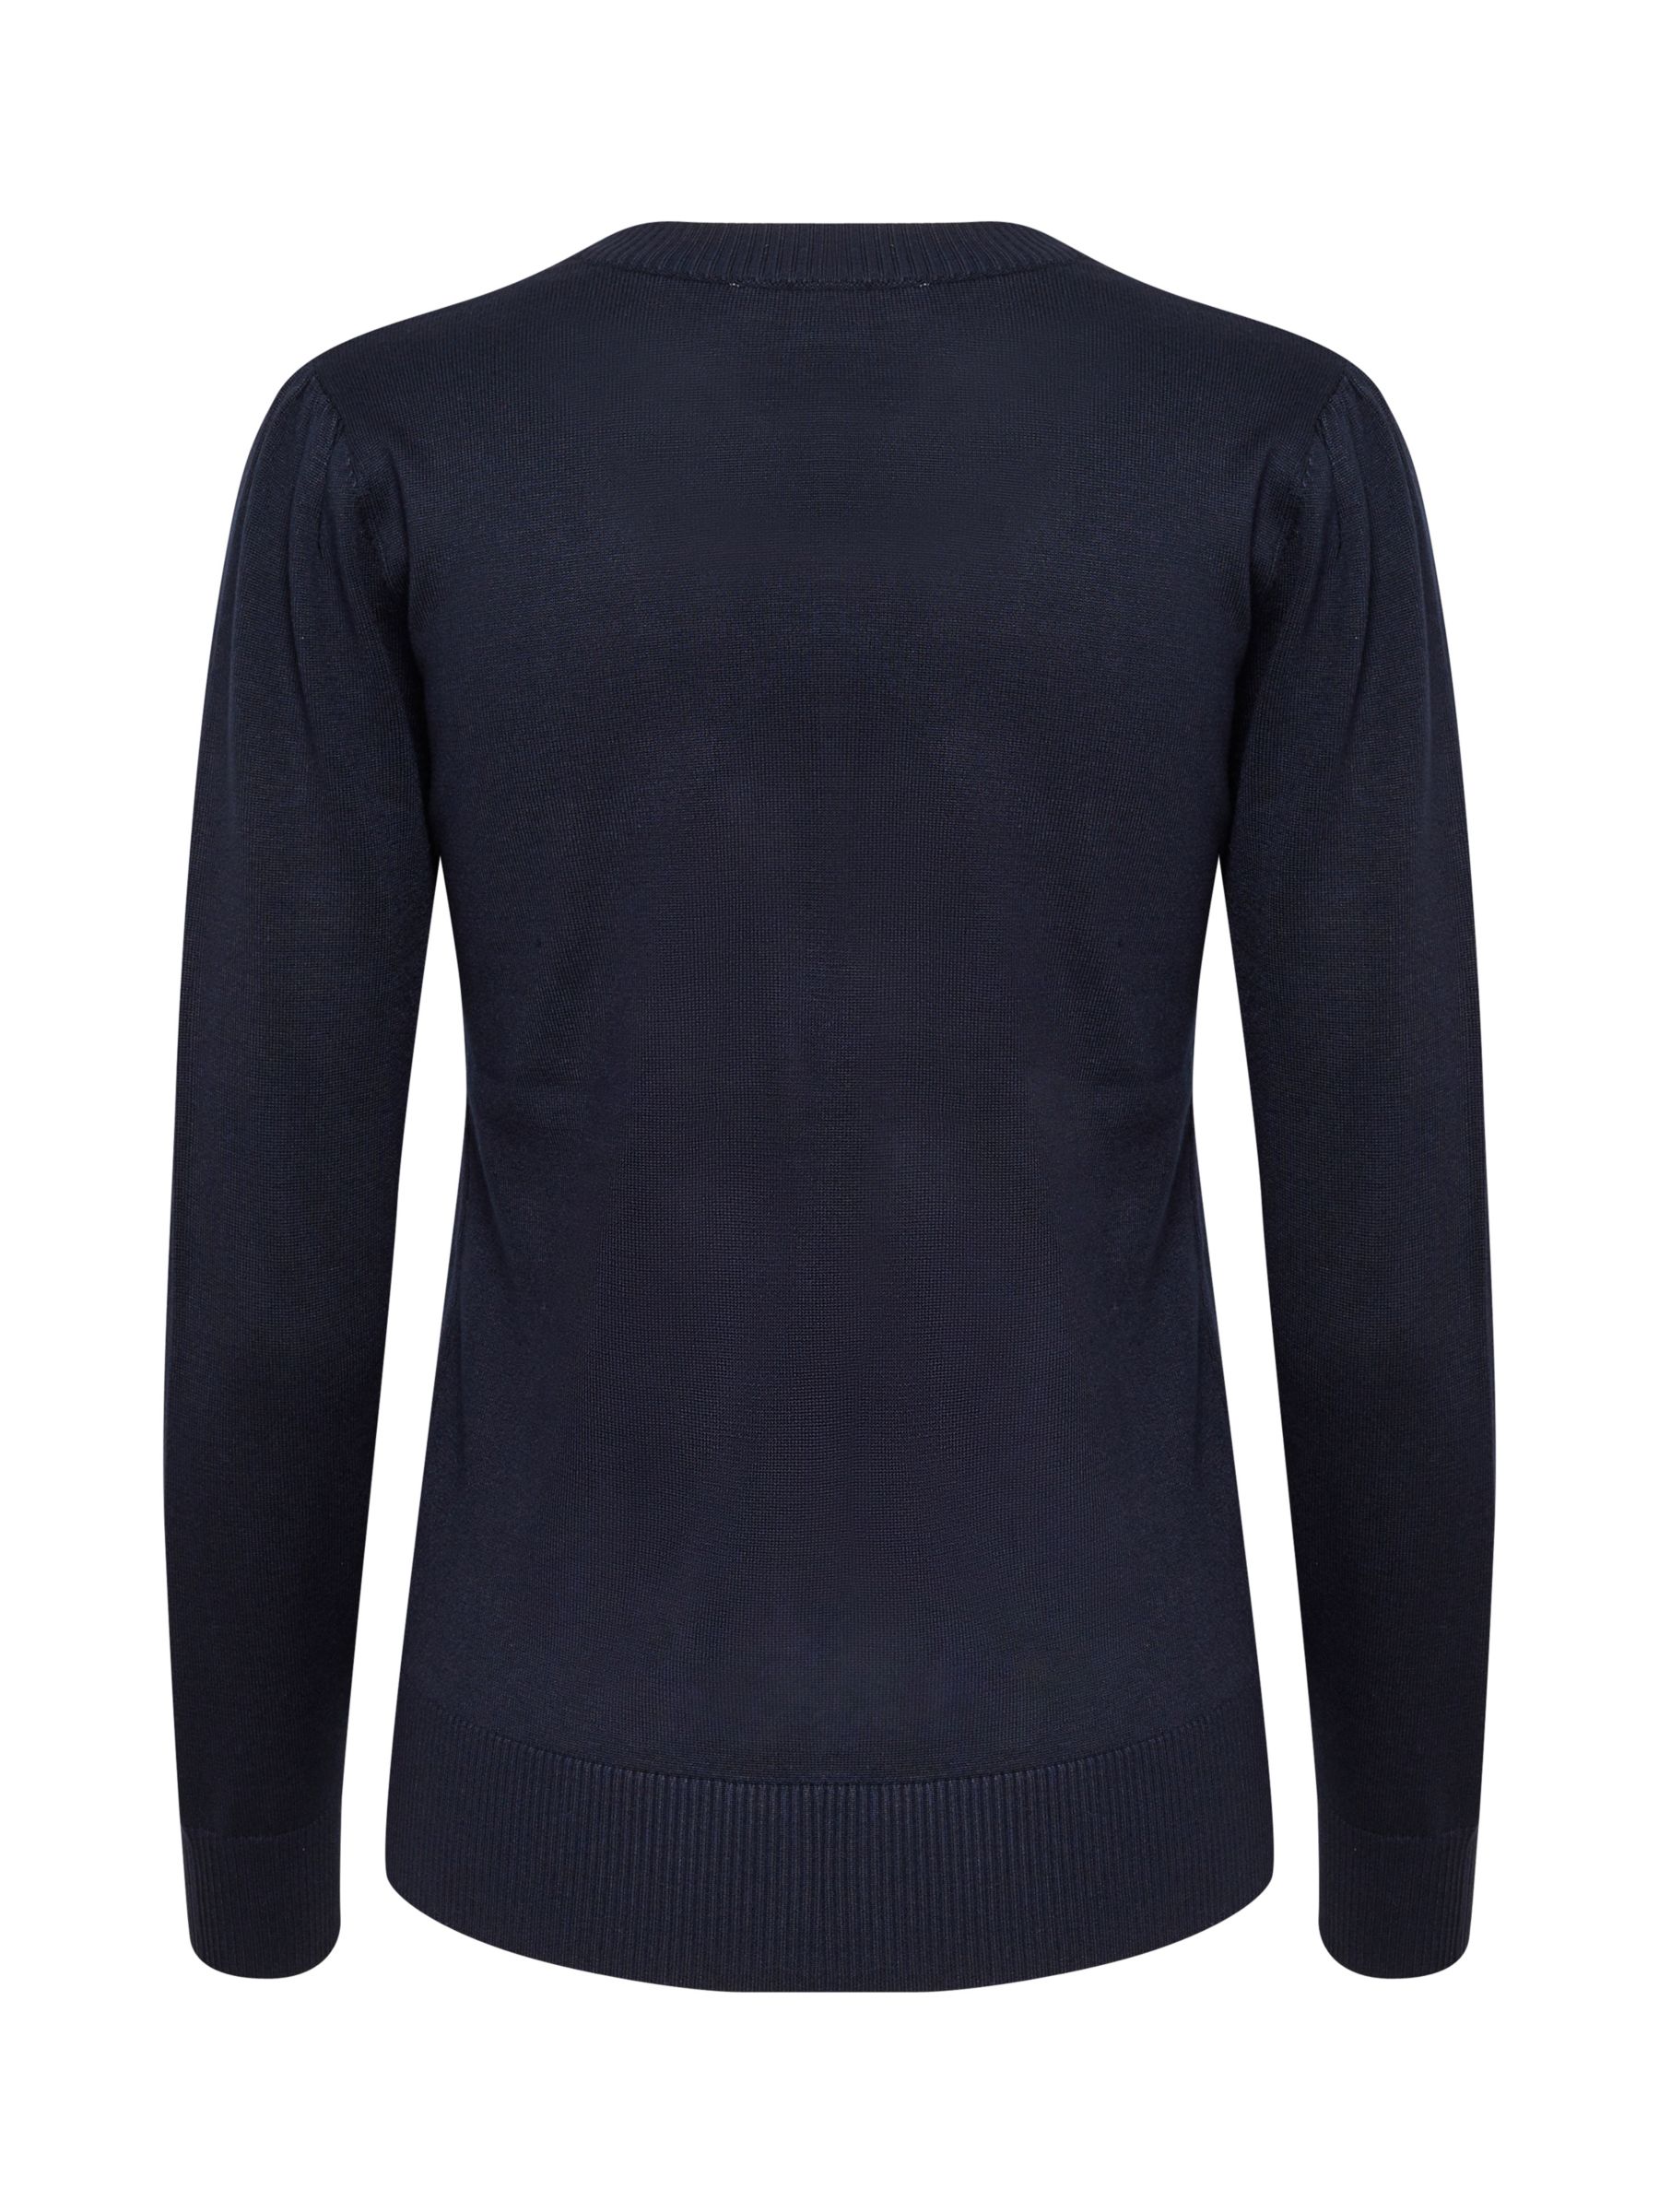 Saint Tropez Mila Knitted Pullover, Navy, XS